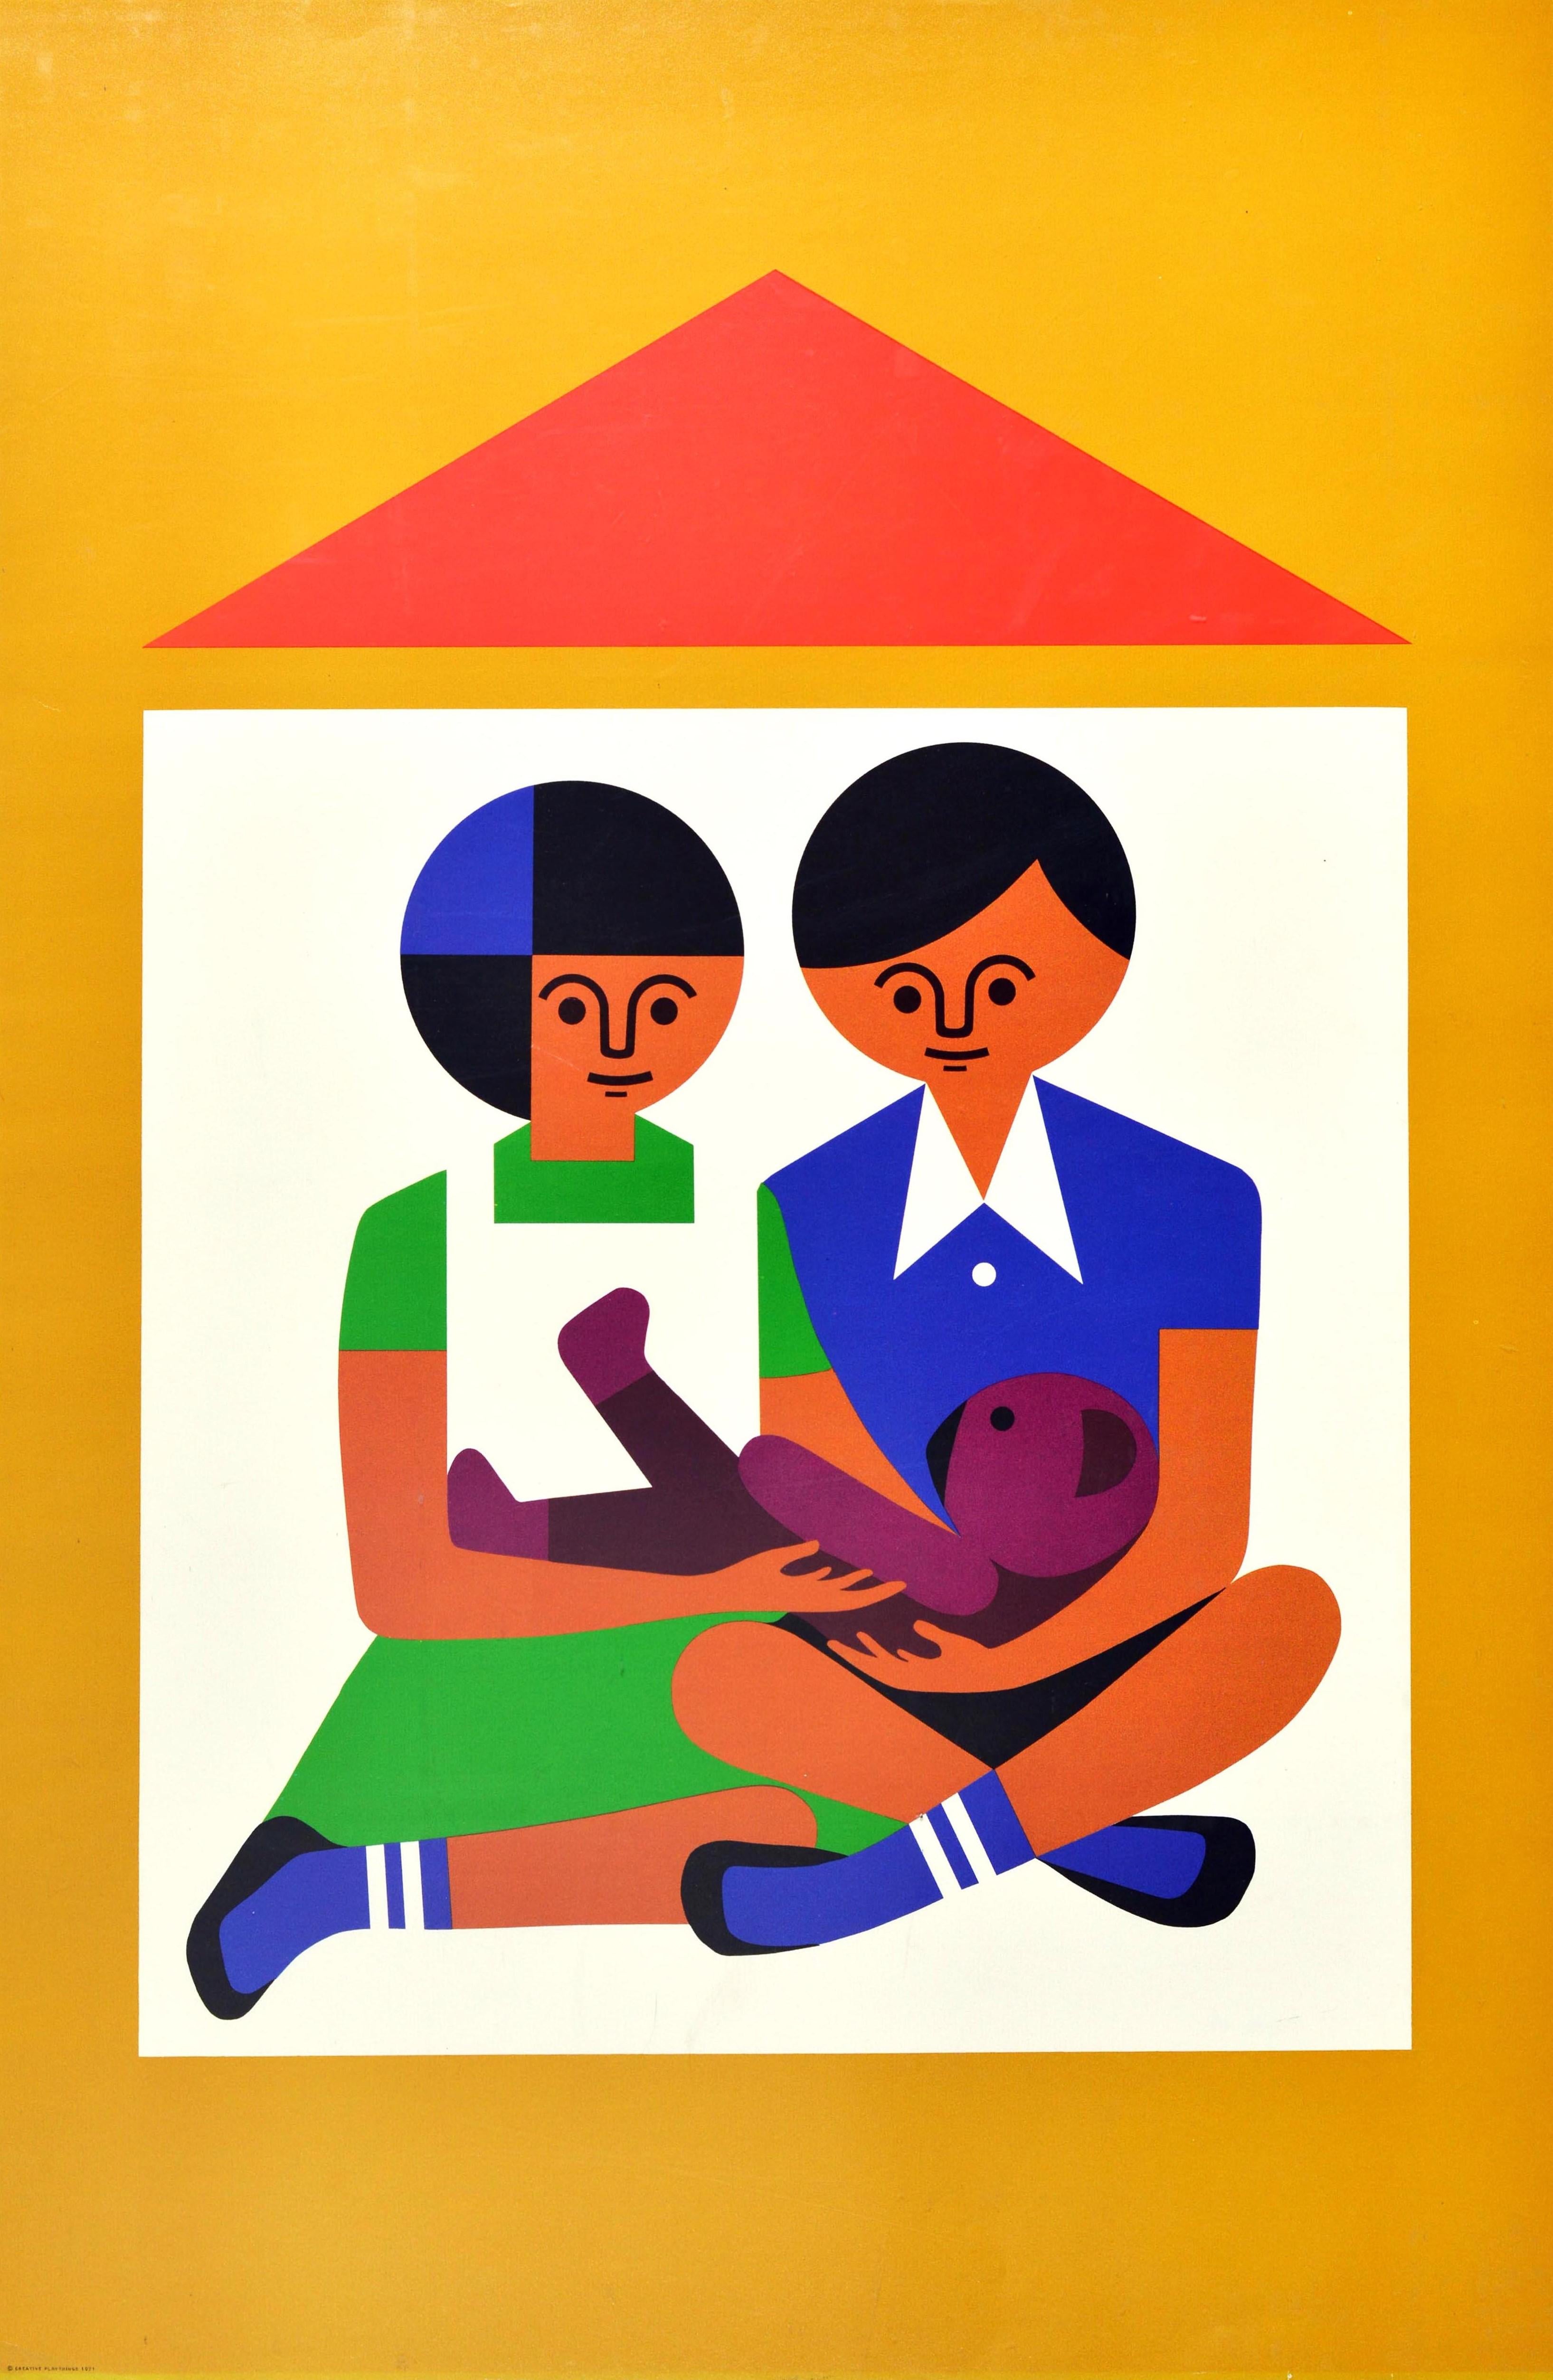 Original vintage advertising poster for the Creative Playthings educational toy shop in Manhattan New York featuring a fun and colourful graphic design by the South African toymaker and illustrator Fredun Shapur (b. 1929), showing a two children -